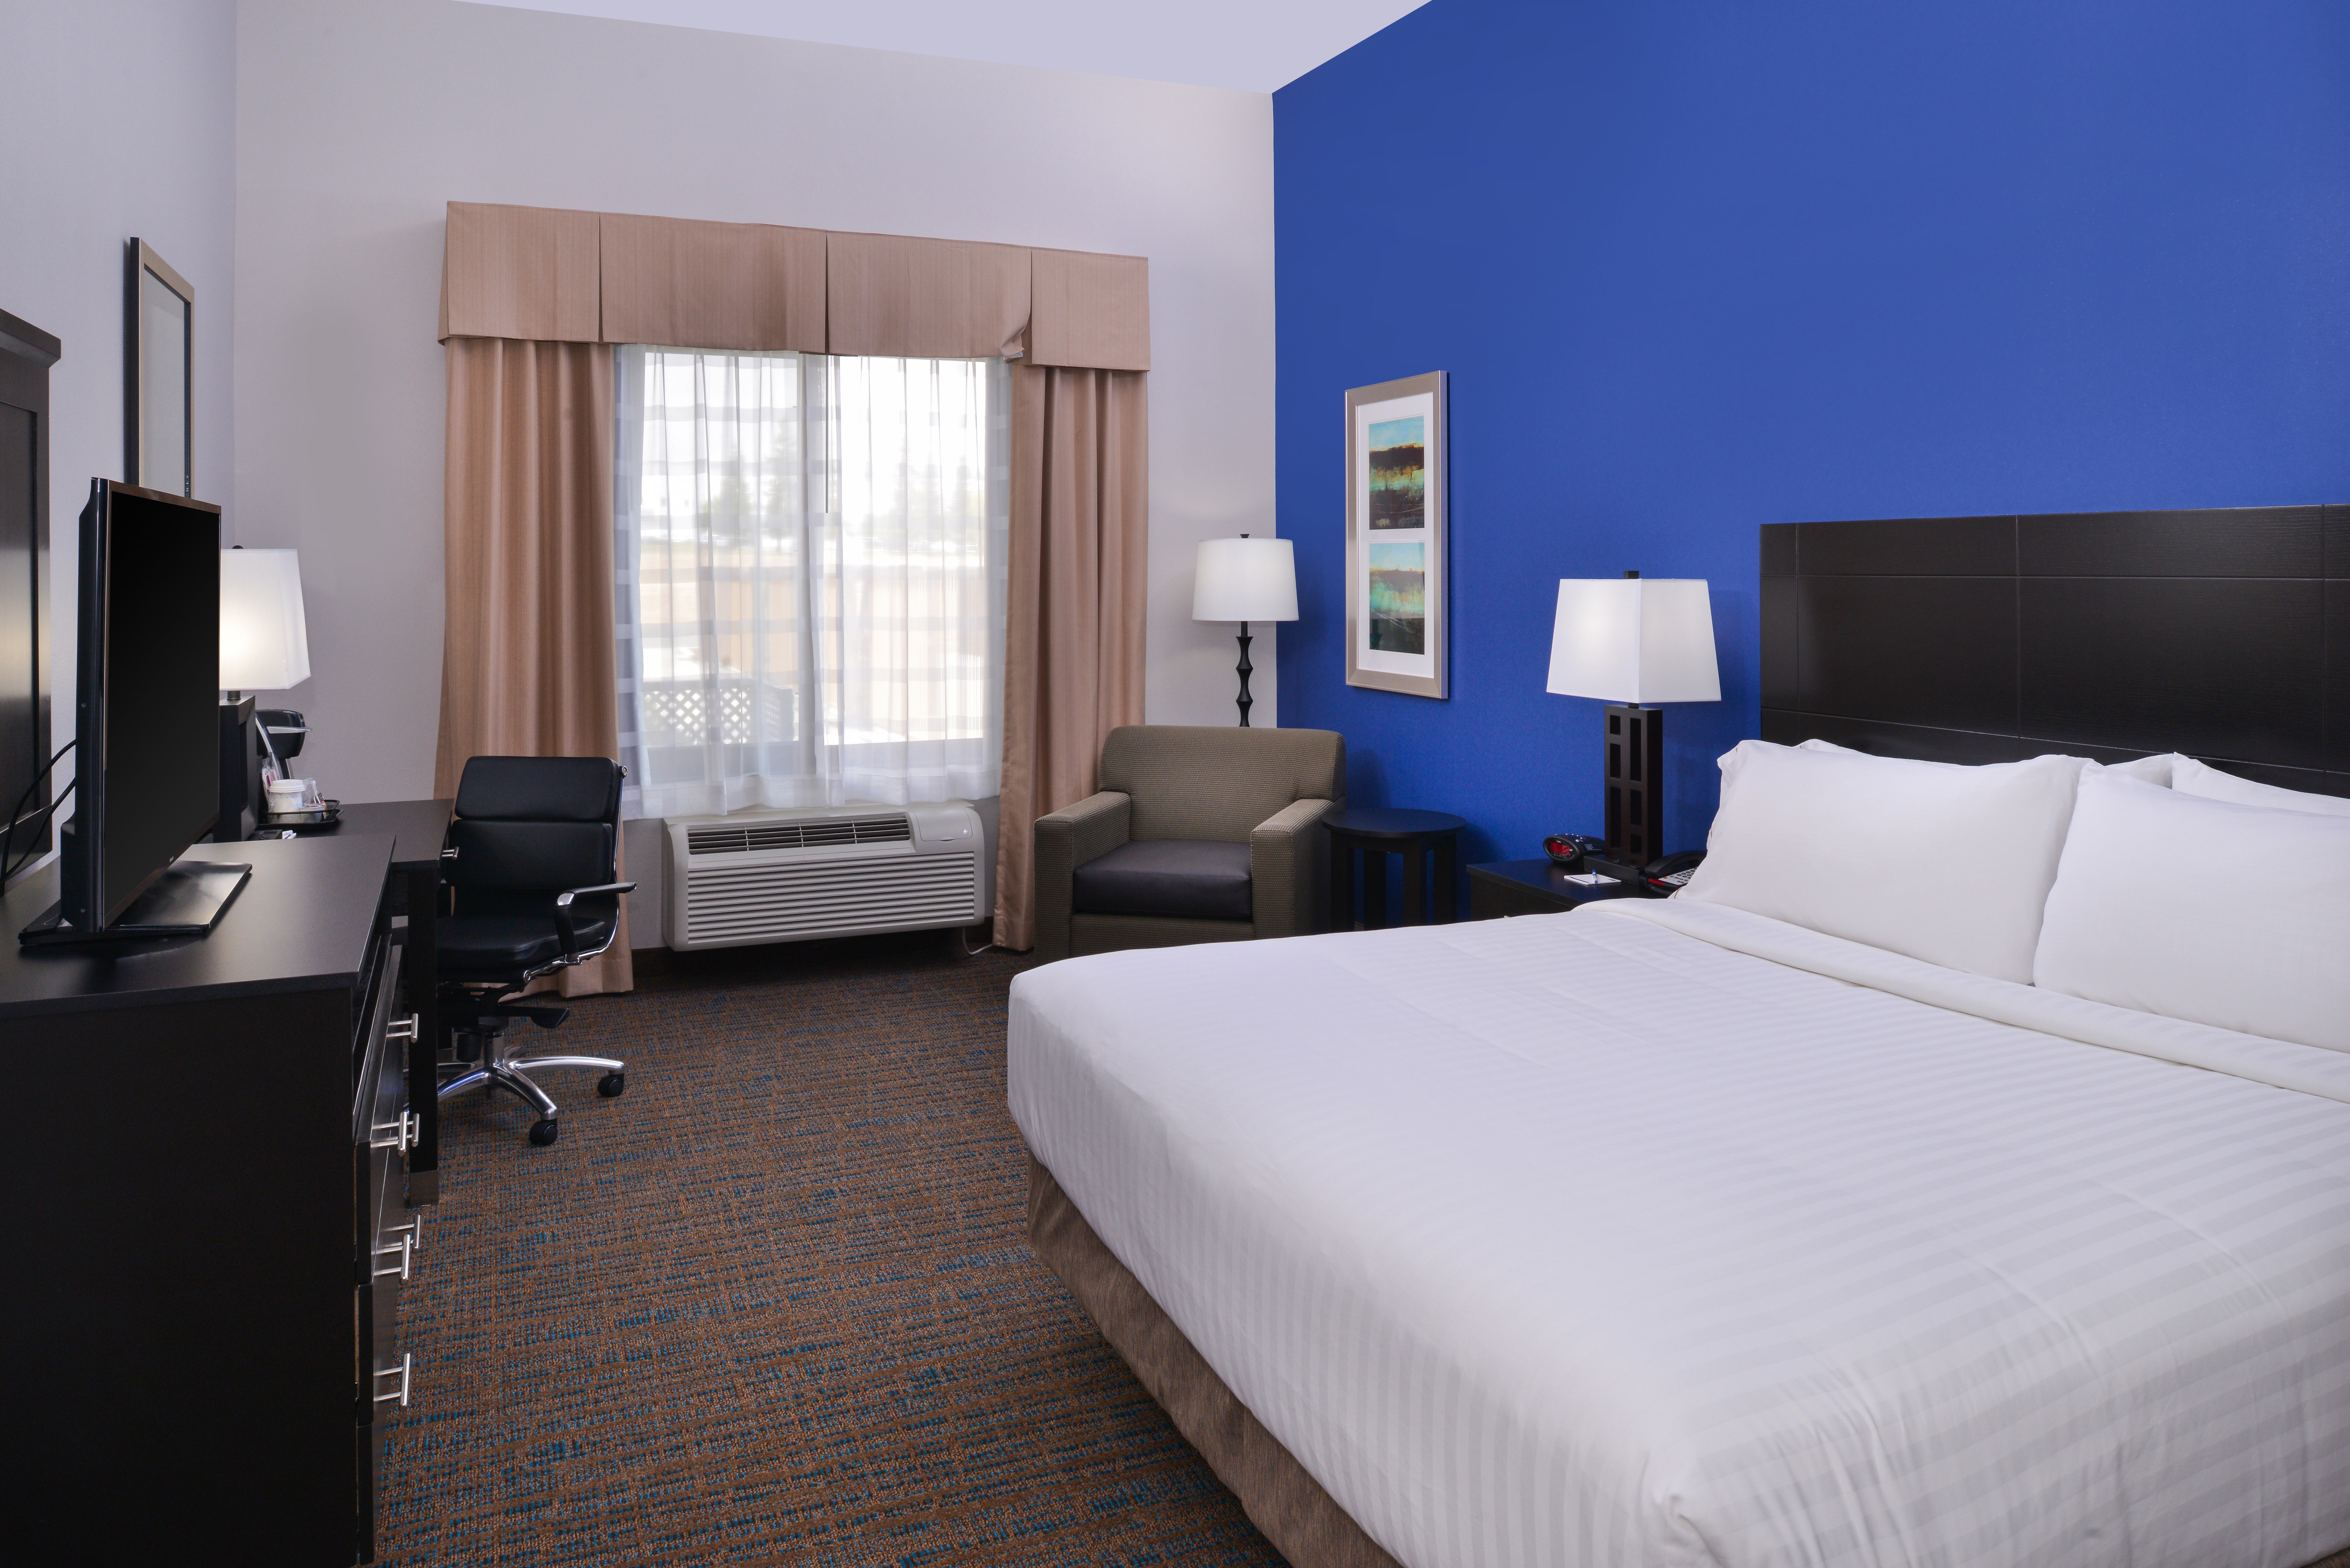 Relax in our brand new Bakersfield hotel!